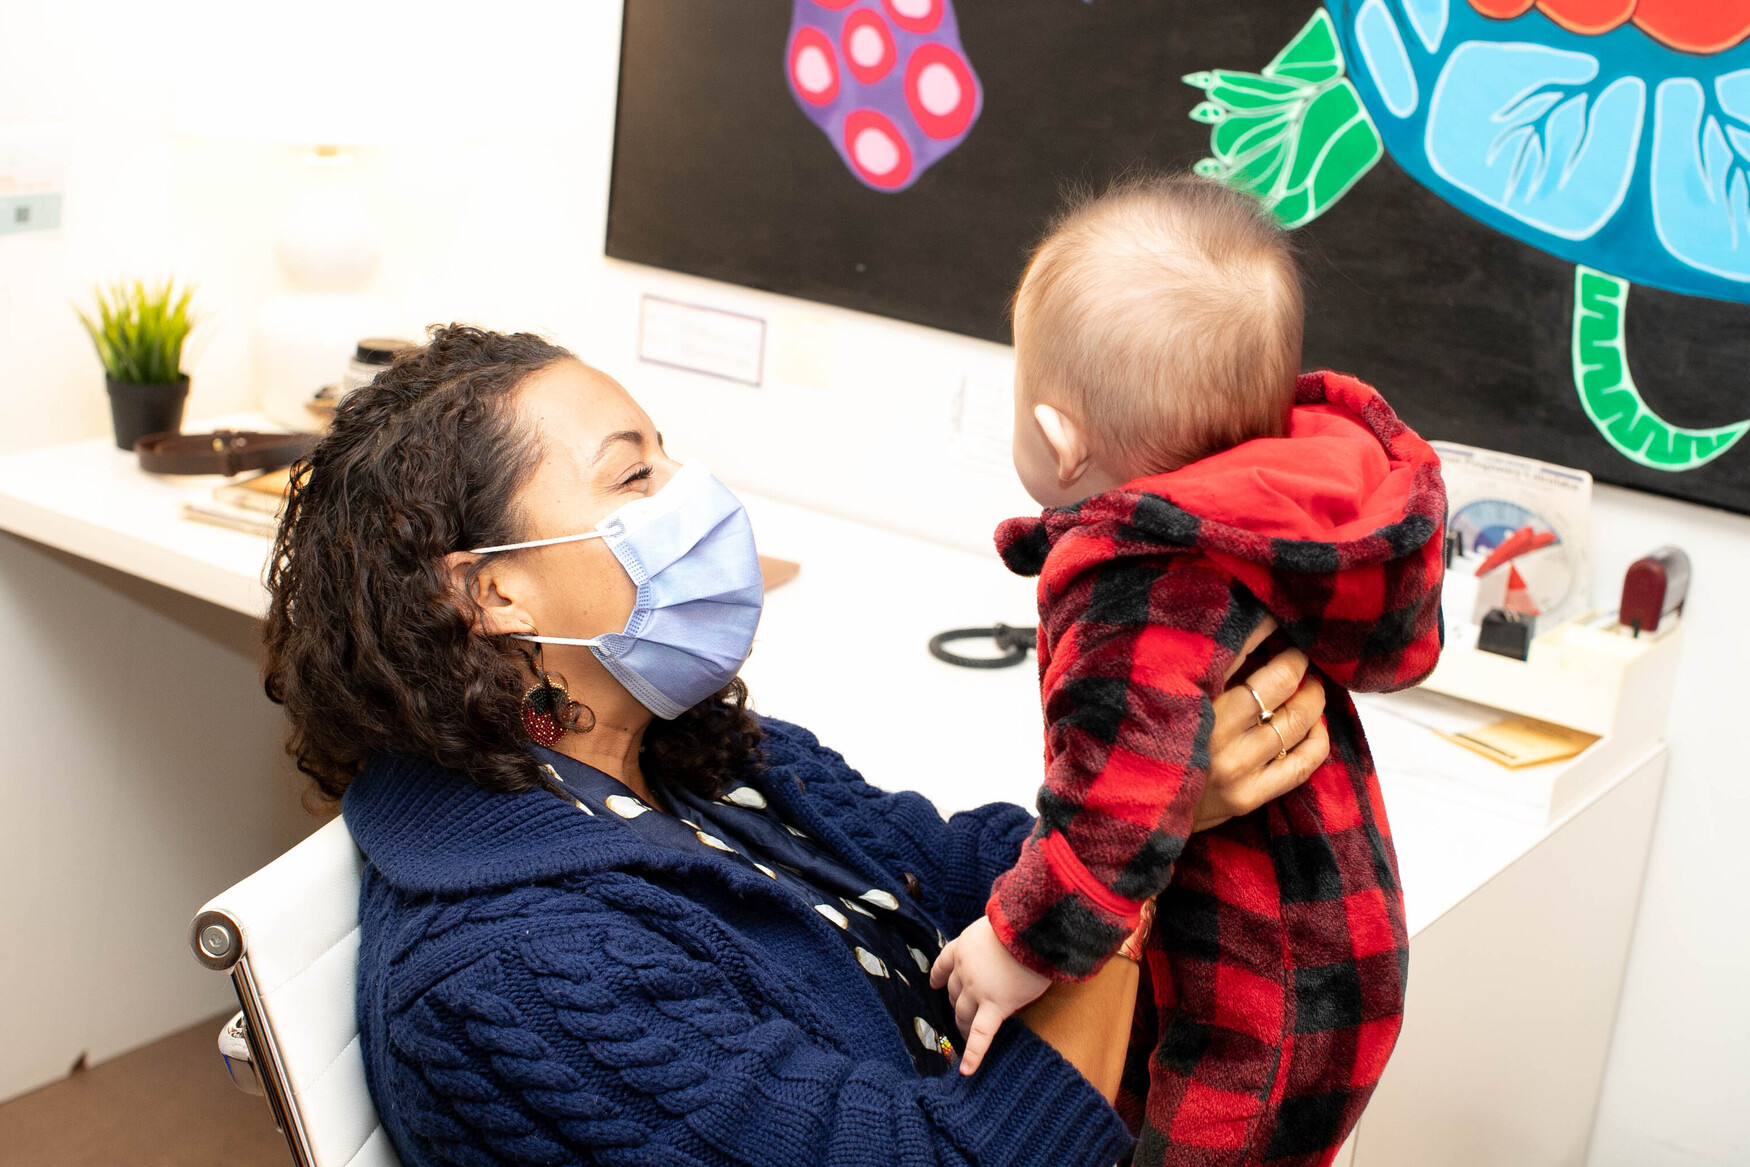 Suzanne Shoush, wearing a blue sweater and surgical mask, holds up a young baby dressed in a red plaid onesie.